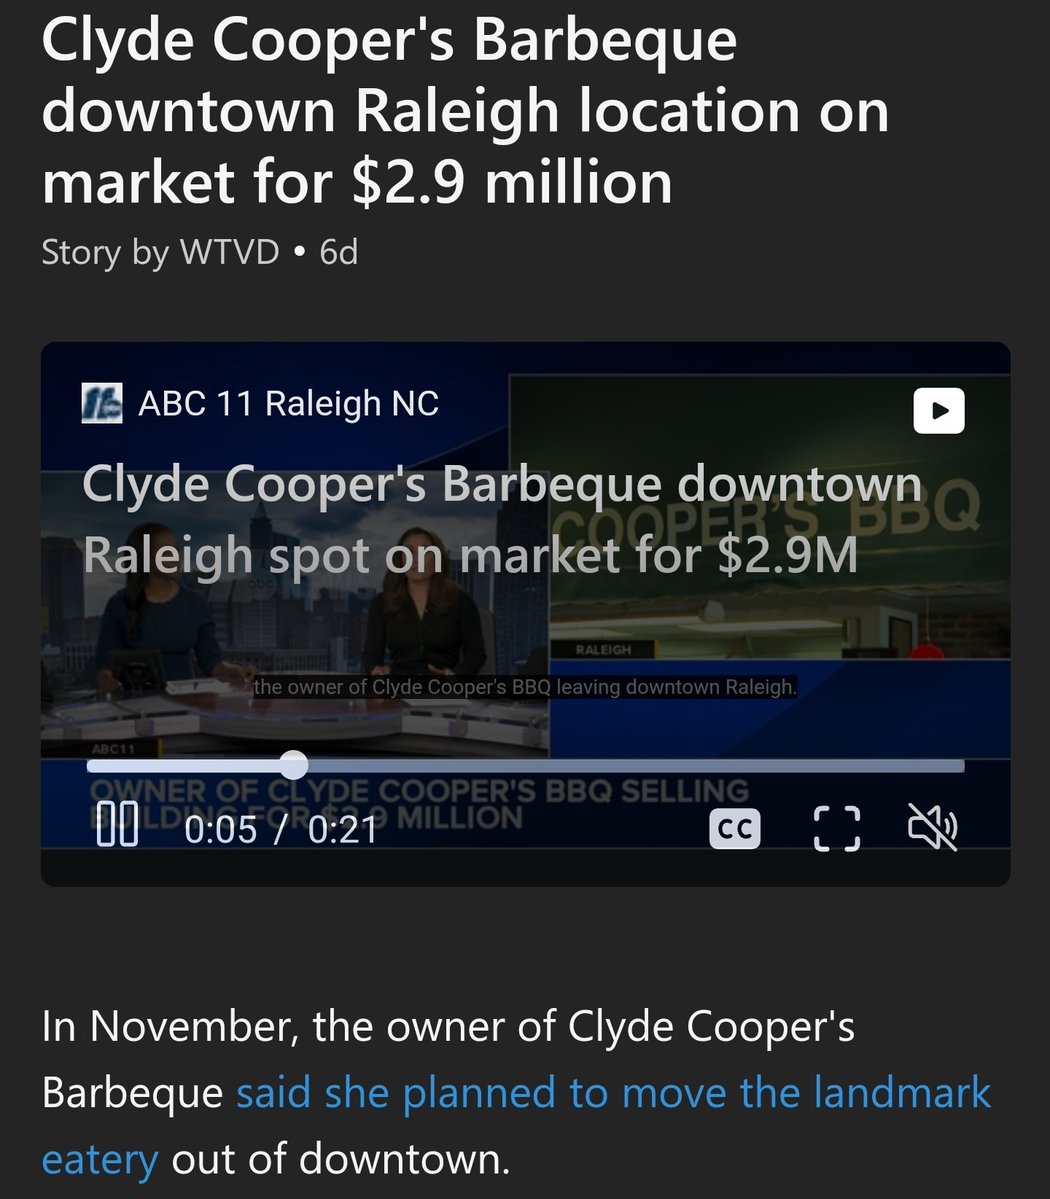 #Raleigh is thriving! Or at least that's what #ralpol says. Overregulation, a severe lack of safety, & turning a blind eye to malfeasance in DT #RaleighNC coupled with high inflation has lead to an exodus of businesses. We need #SmallBusiness downtown.
#BledsoeForRaleigh